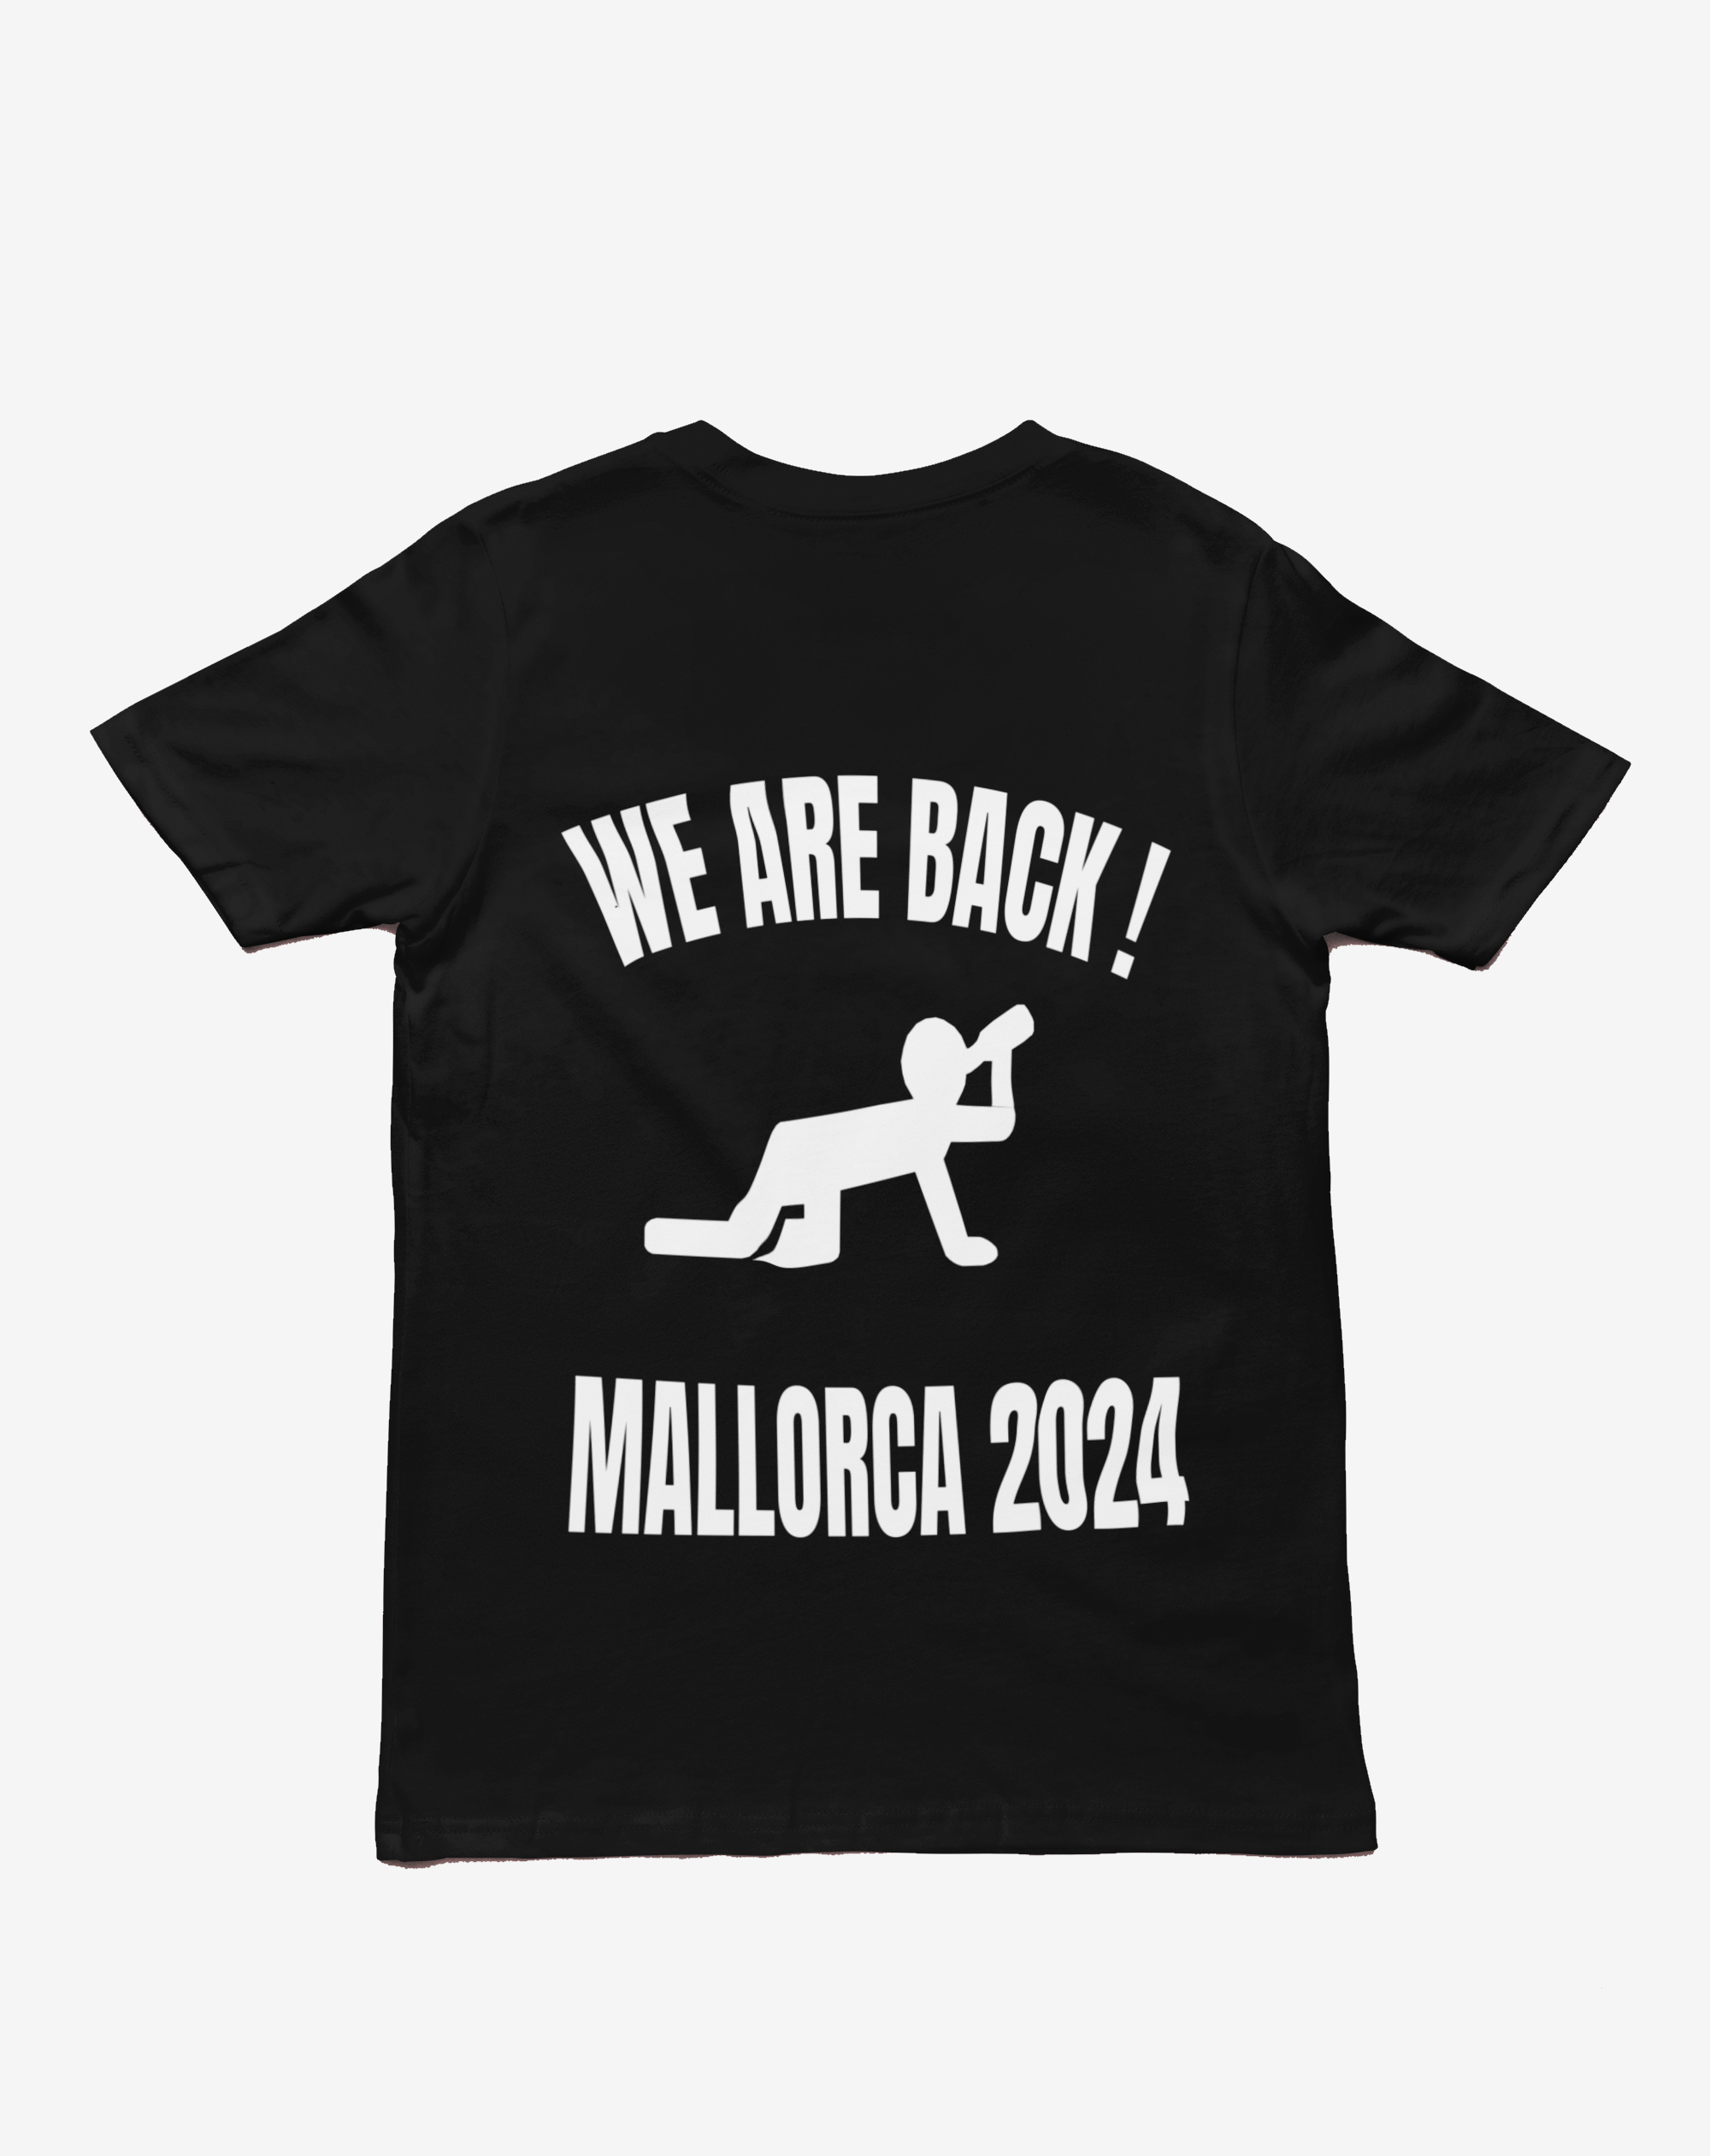 "We are back ! " T-Shirt